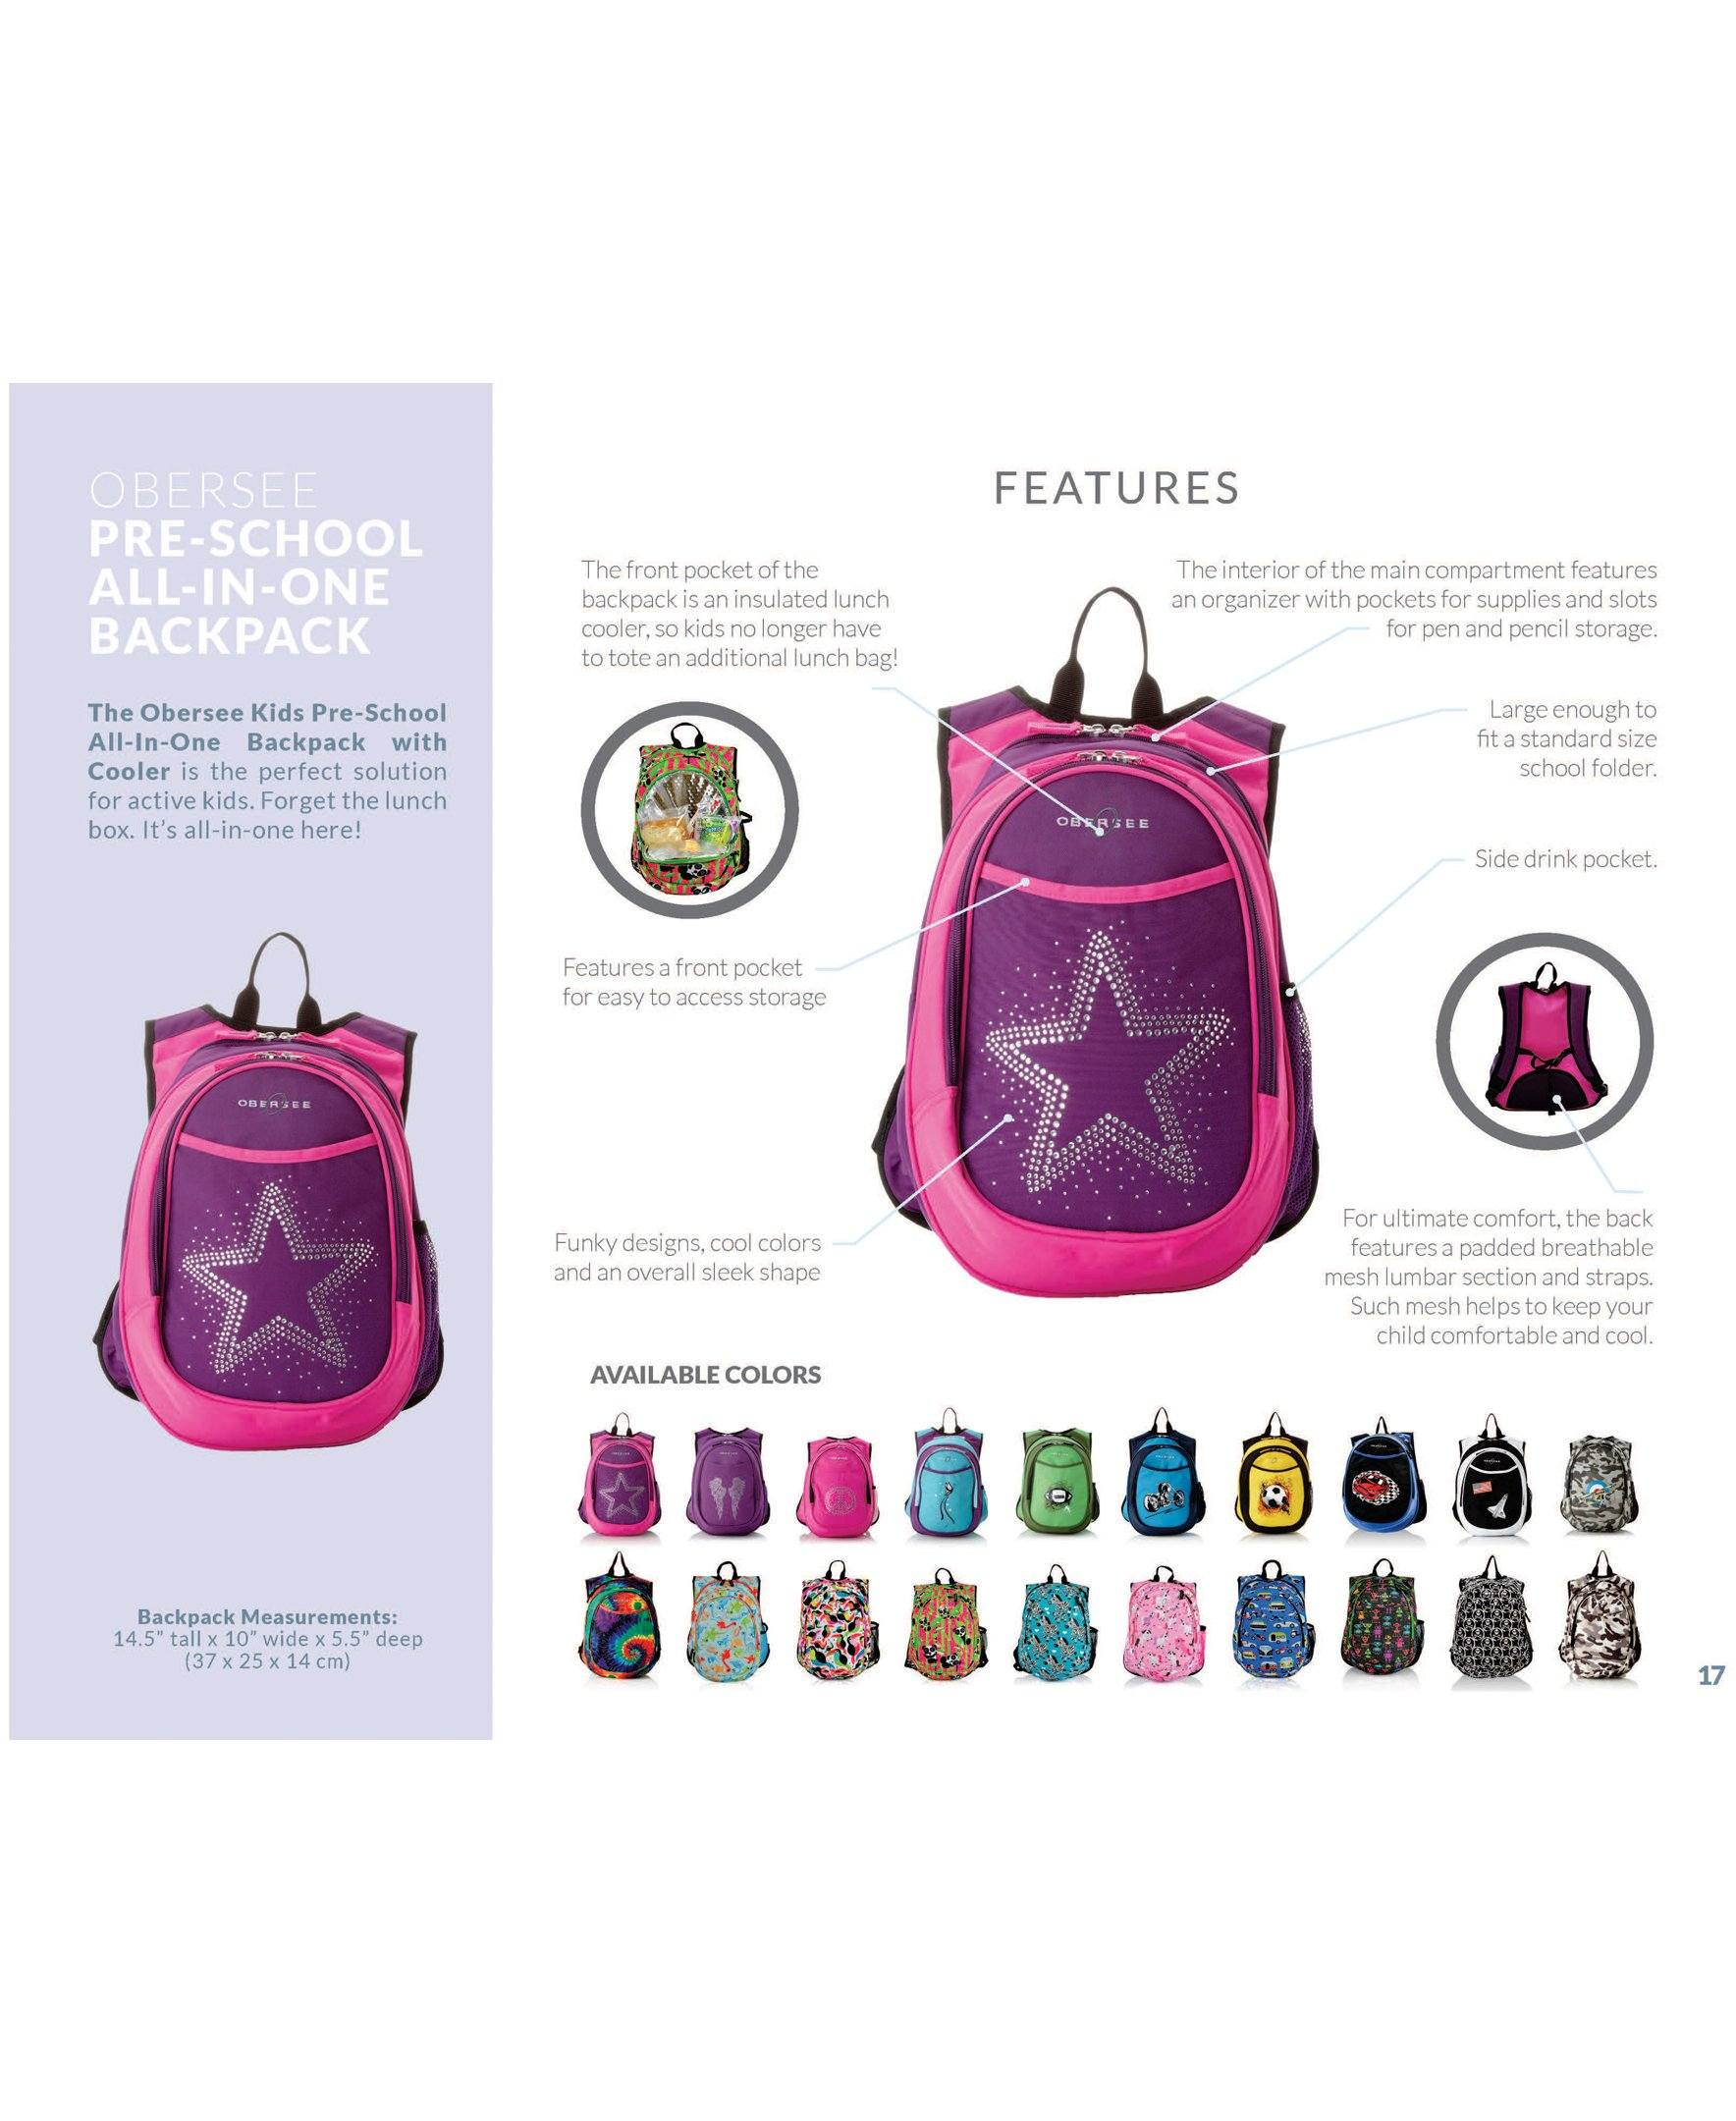 O3KCBP003 Obersee Mini Preschool All-in-One Backpack for Toddlers and Kids with integrated Insulated Cooler | Bling Rhinestone Star - image 5 of 5